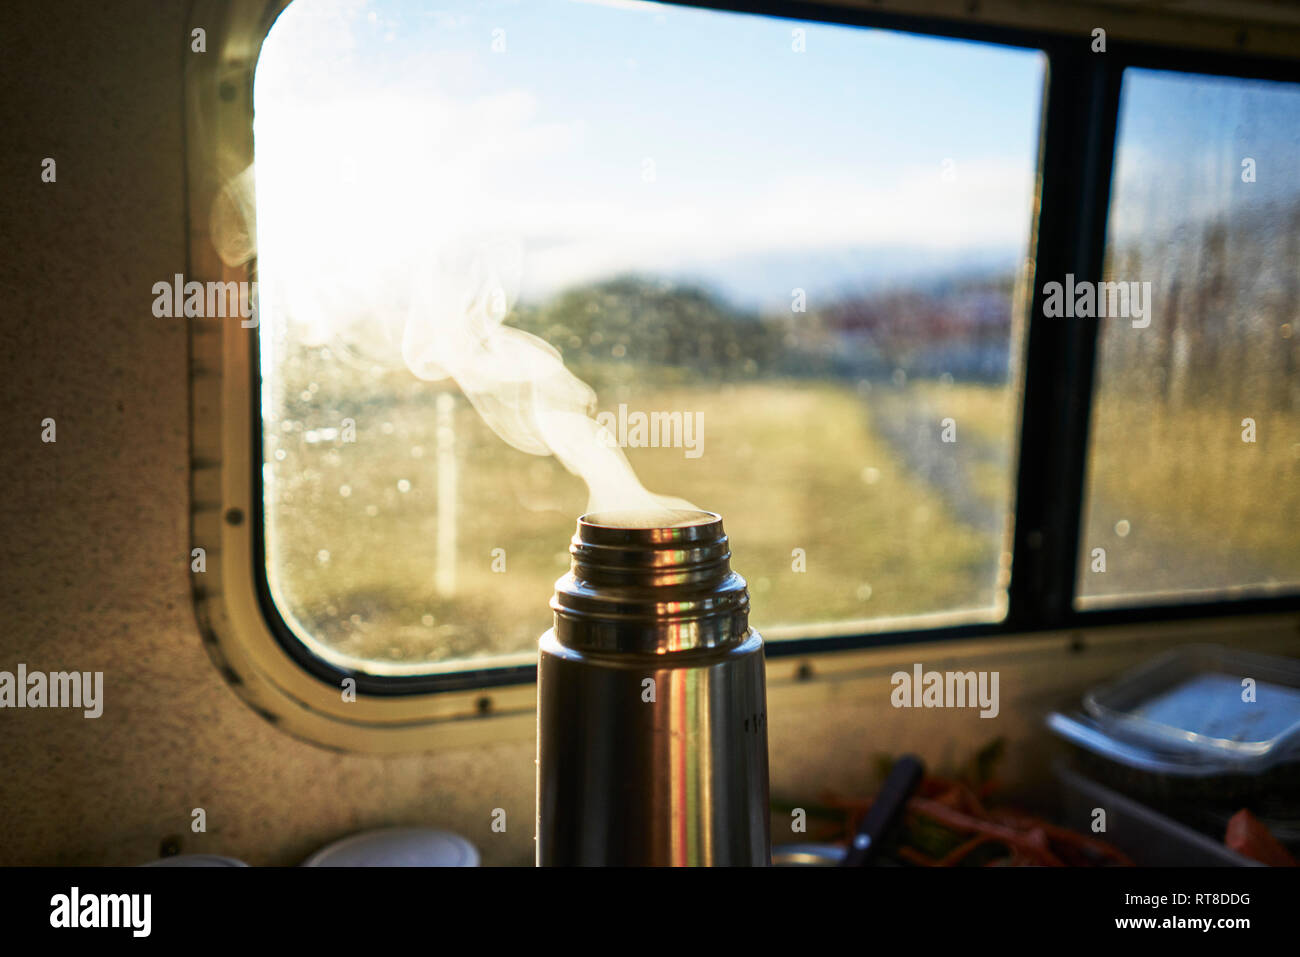 https://c8.alamy.com/comp/RT8DDG/steaming-thermos-flask-in-camper-RT8DDG.jpg